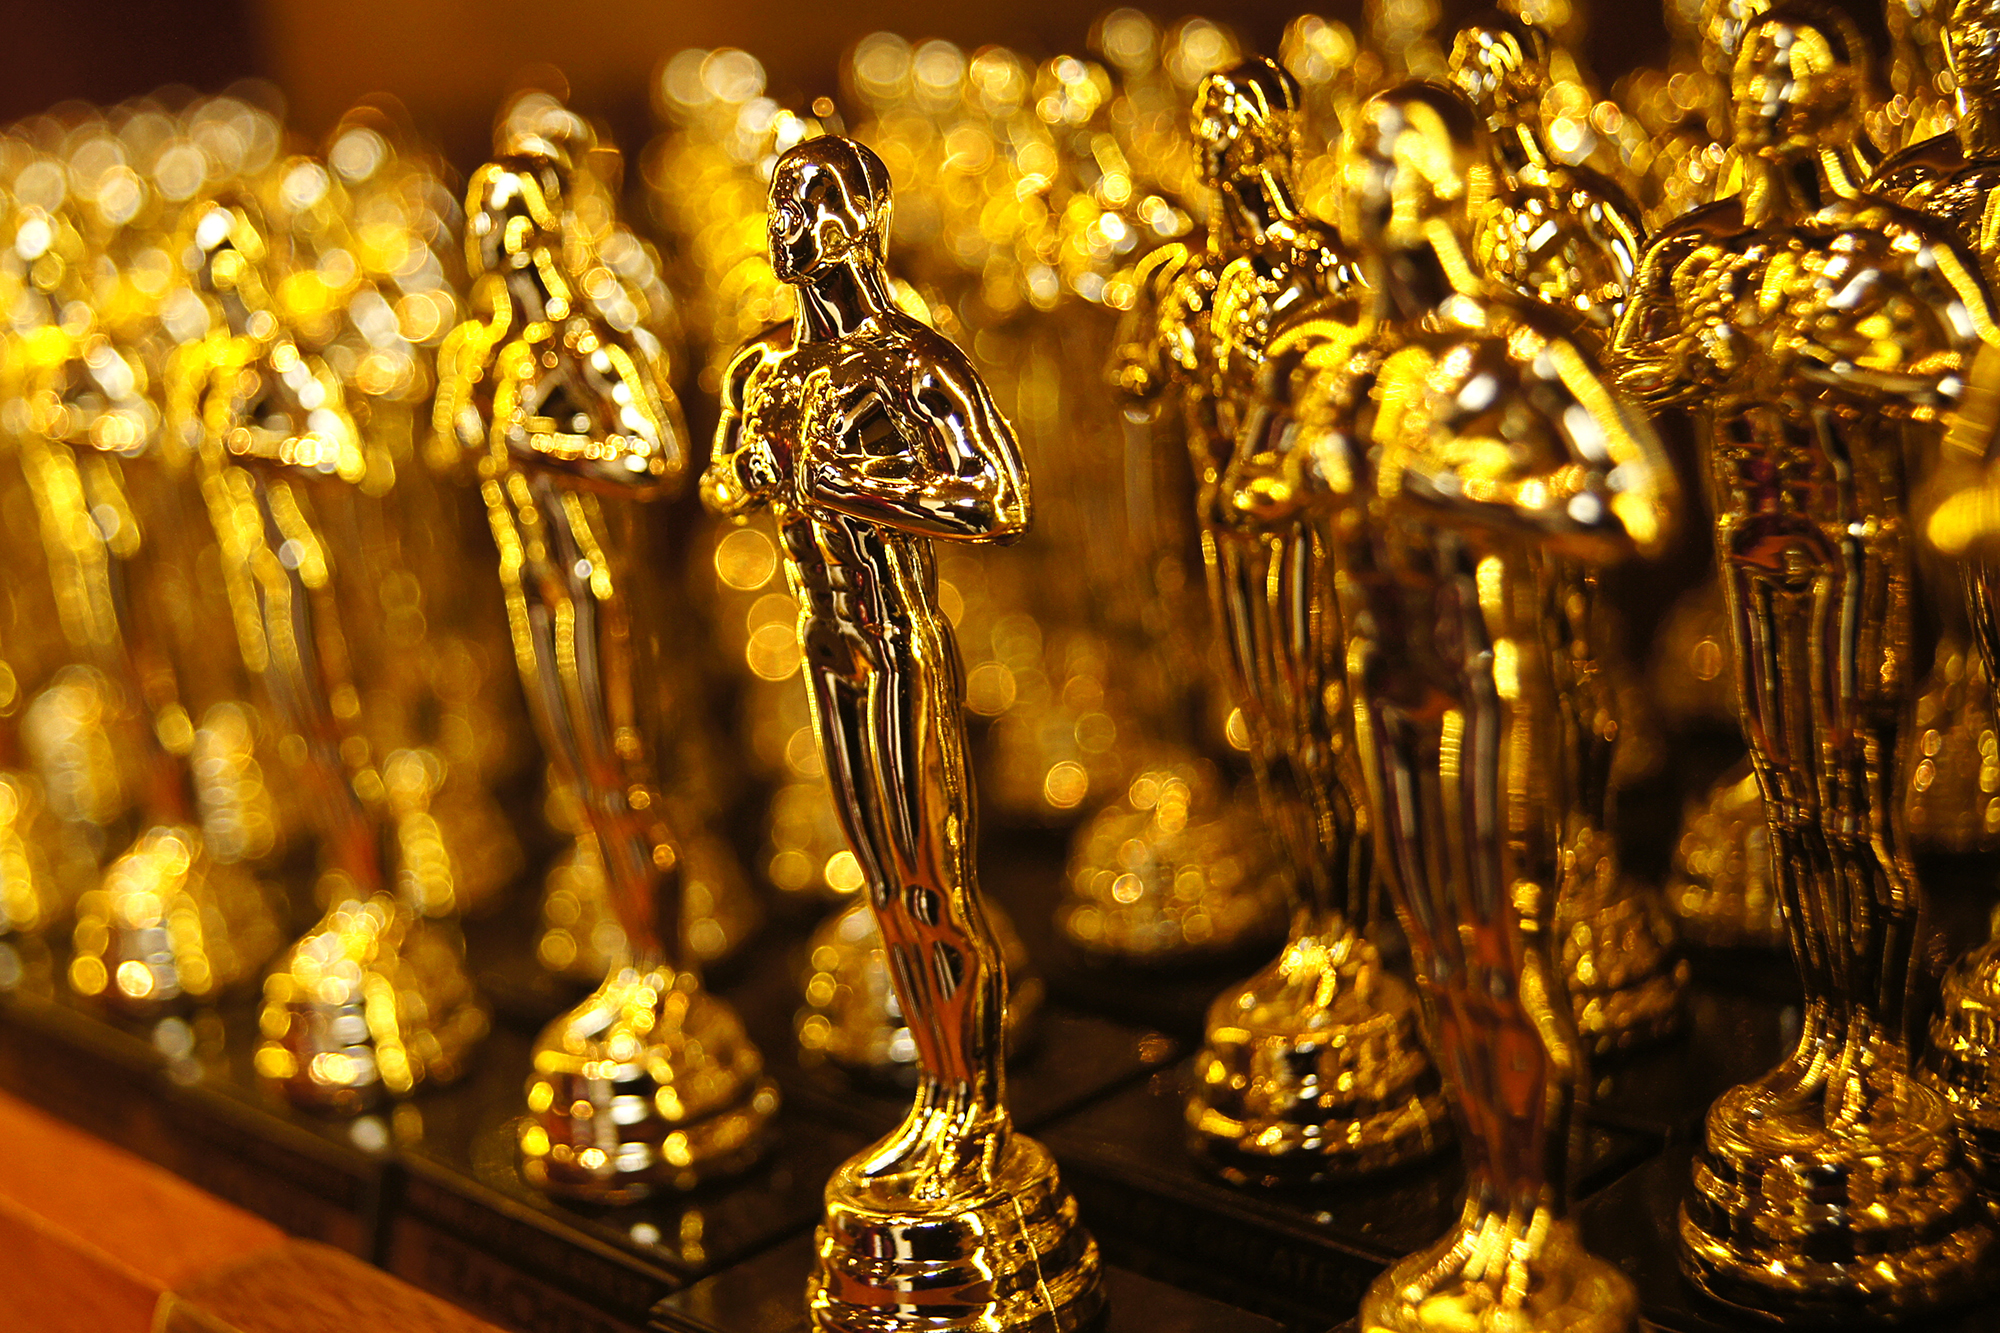 Who is hosting the Oscars 2022?